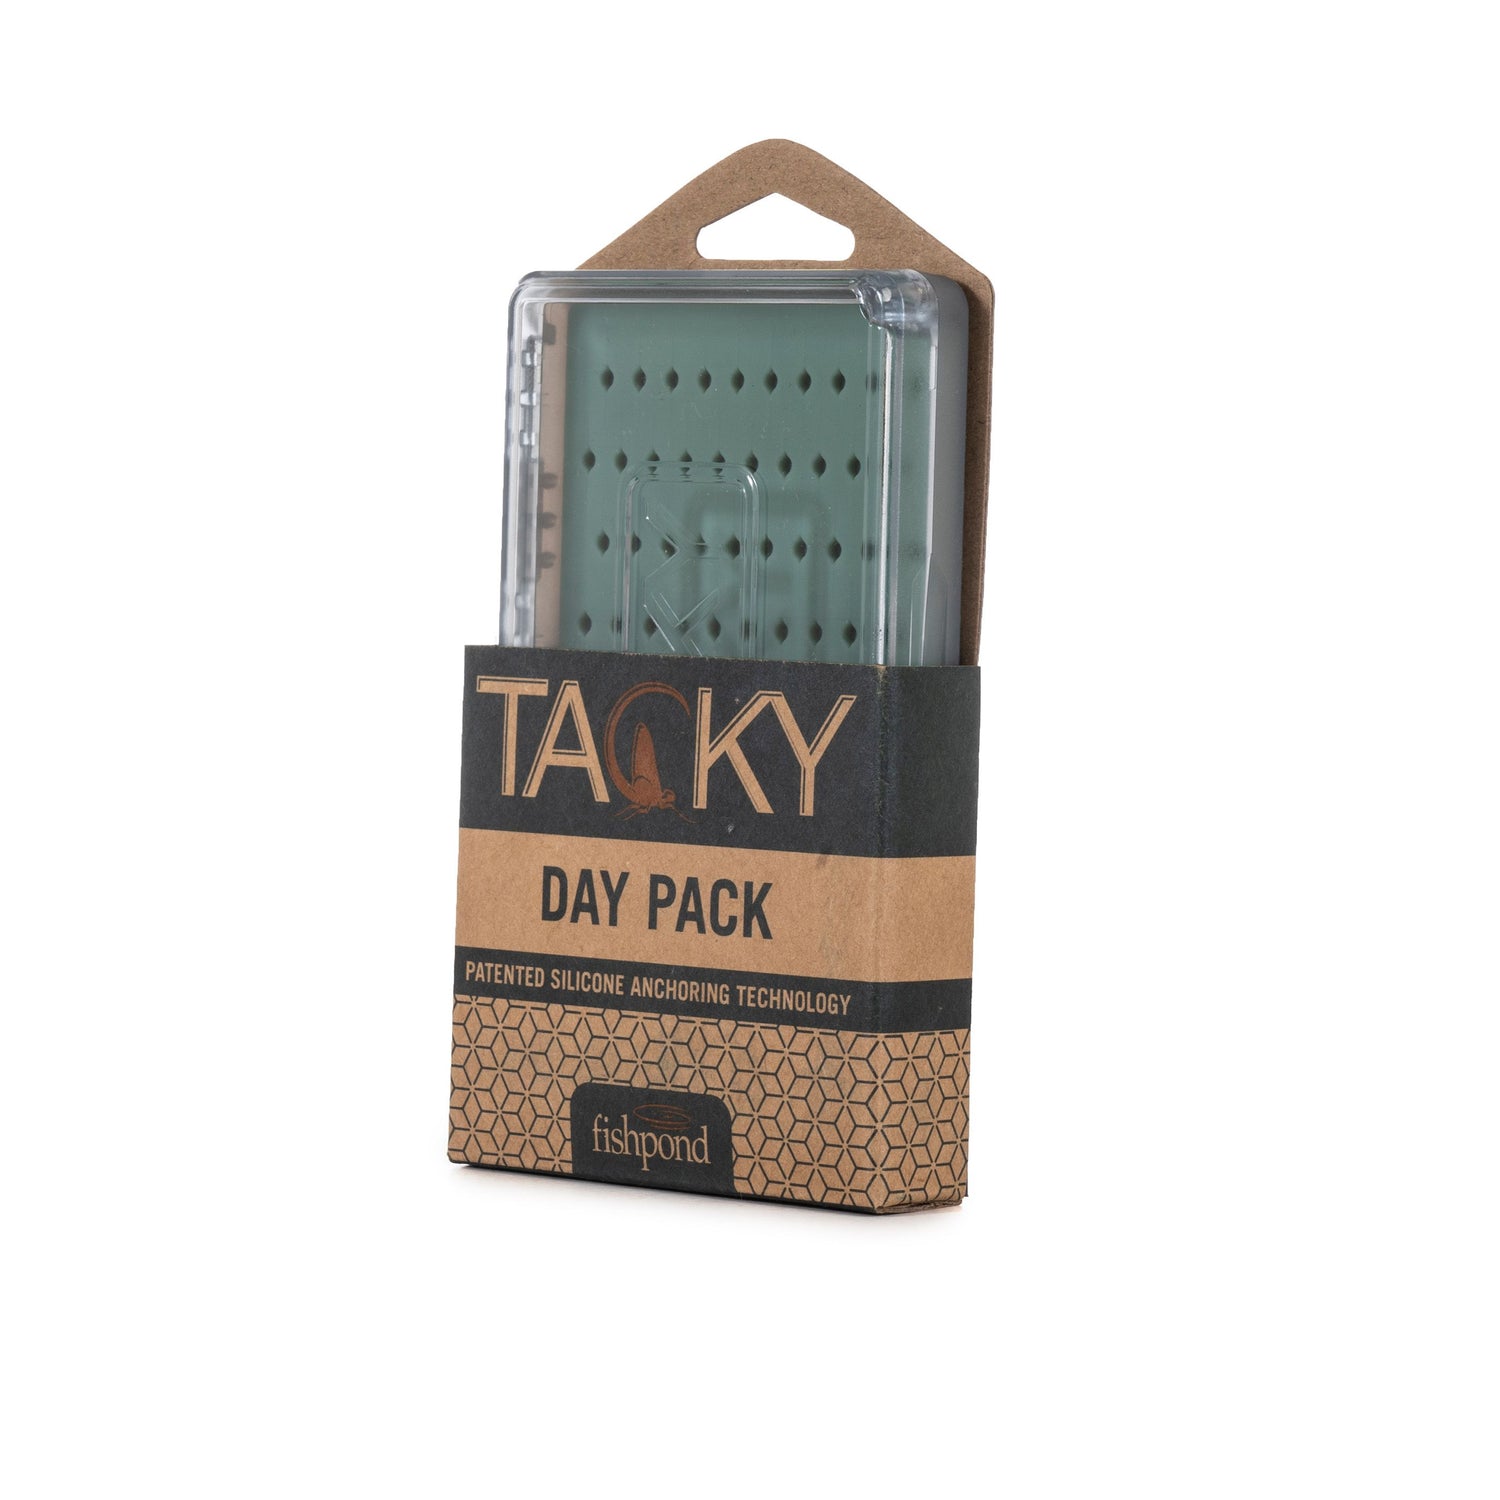 New from Fishpond, Fishpond Tacky Fly Boxes